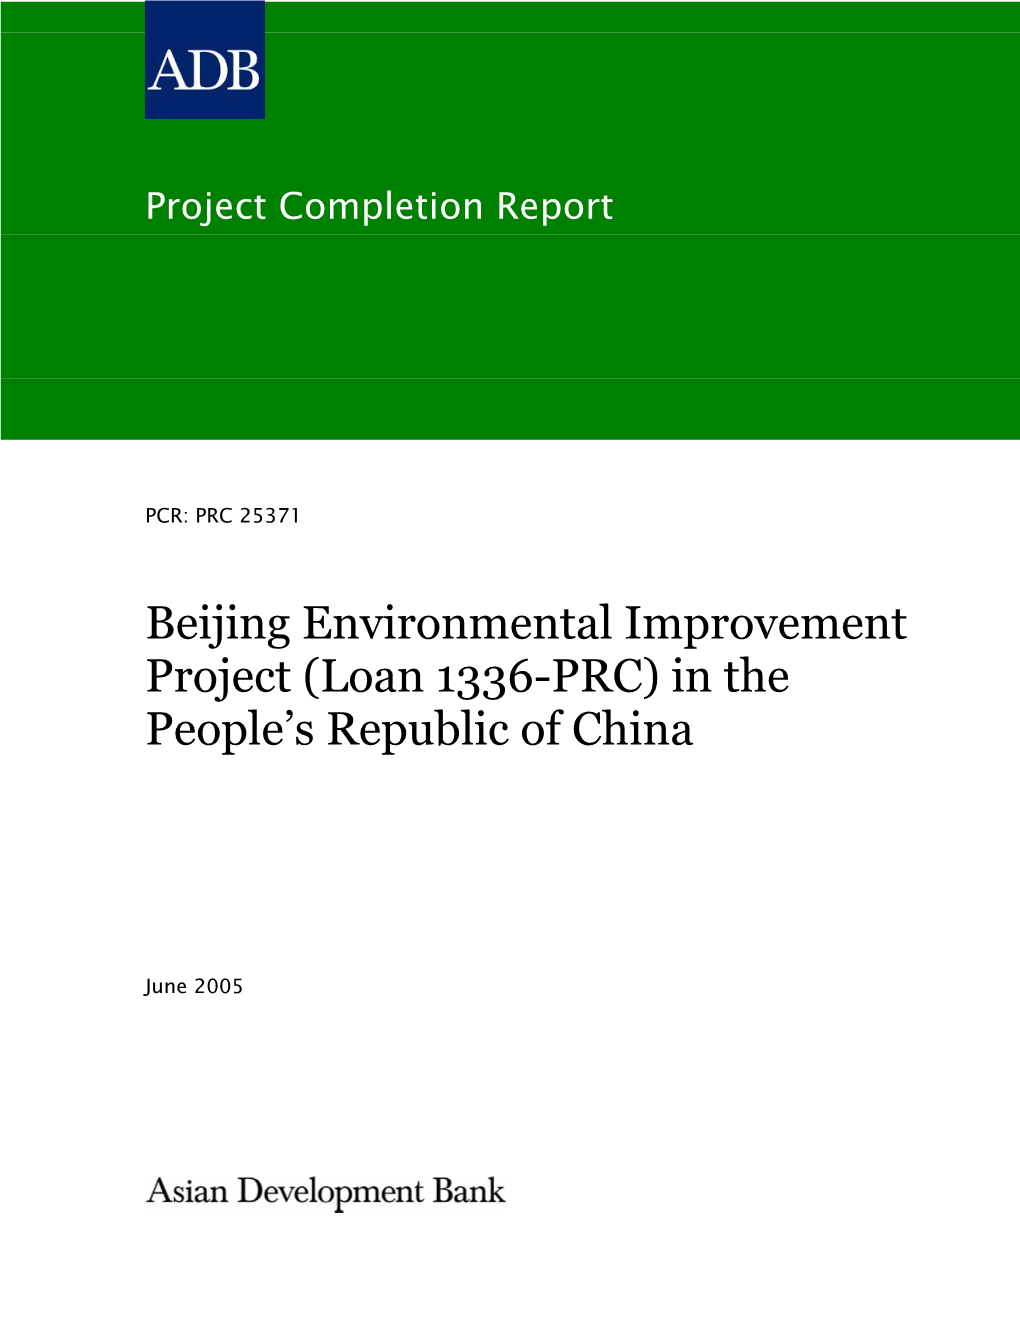 Beijing Environmental Improvement Project (Loan 1336-PRC) in the People’S Republic of China